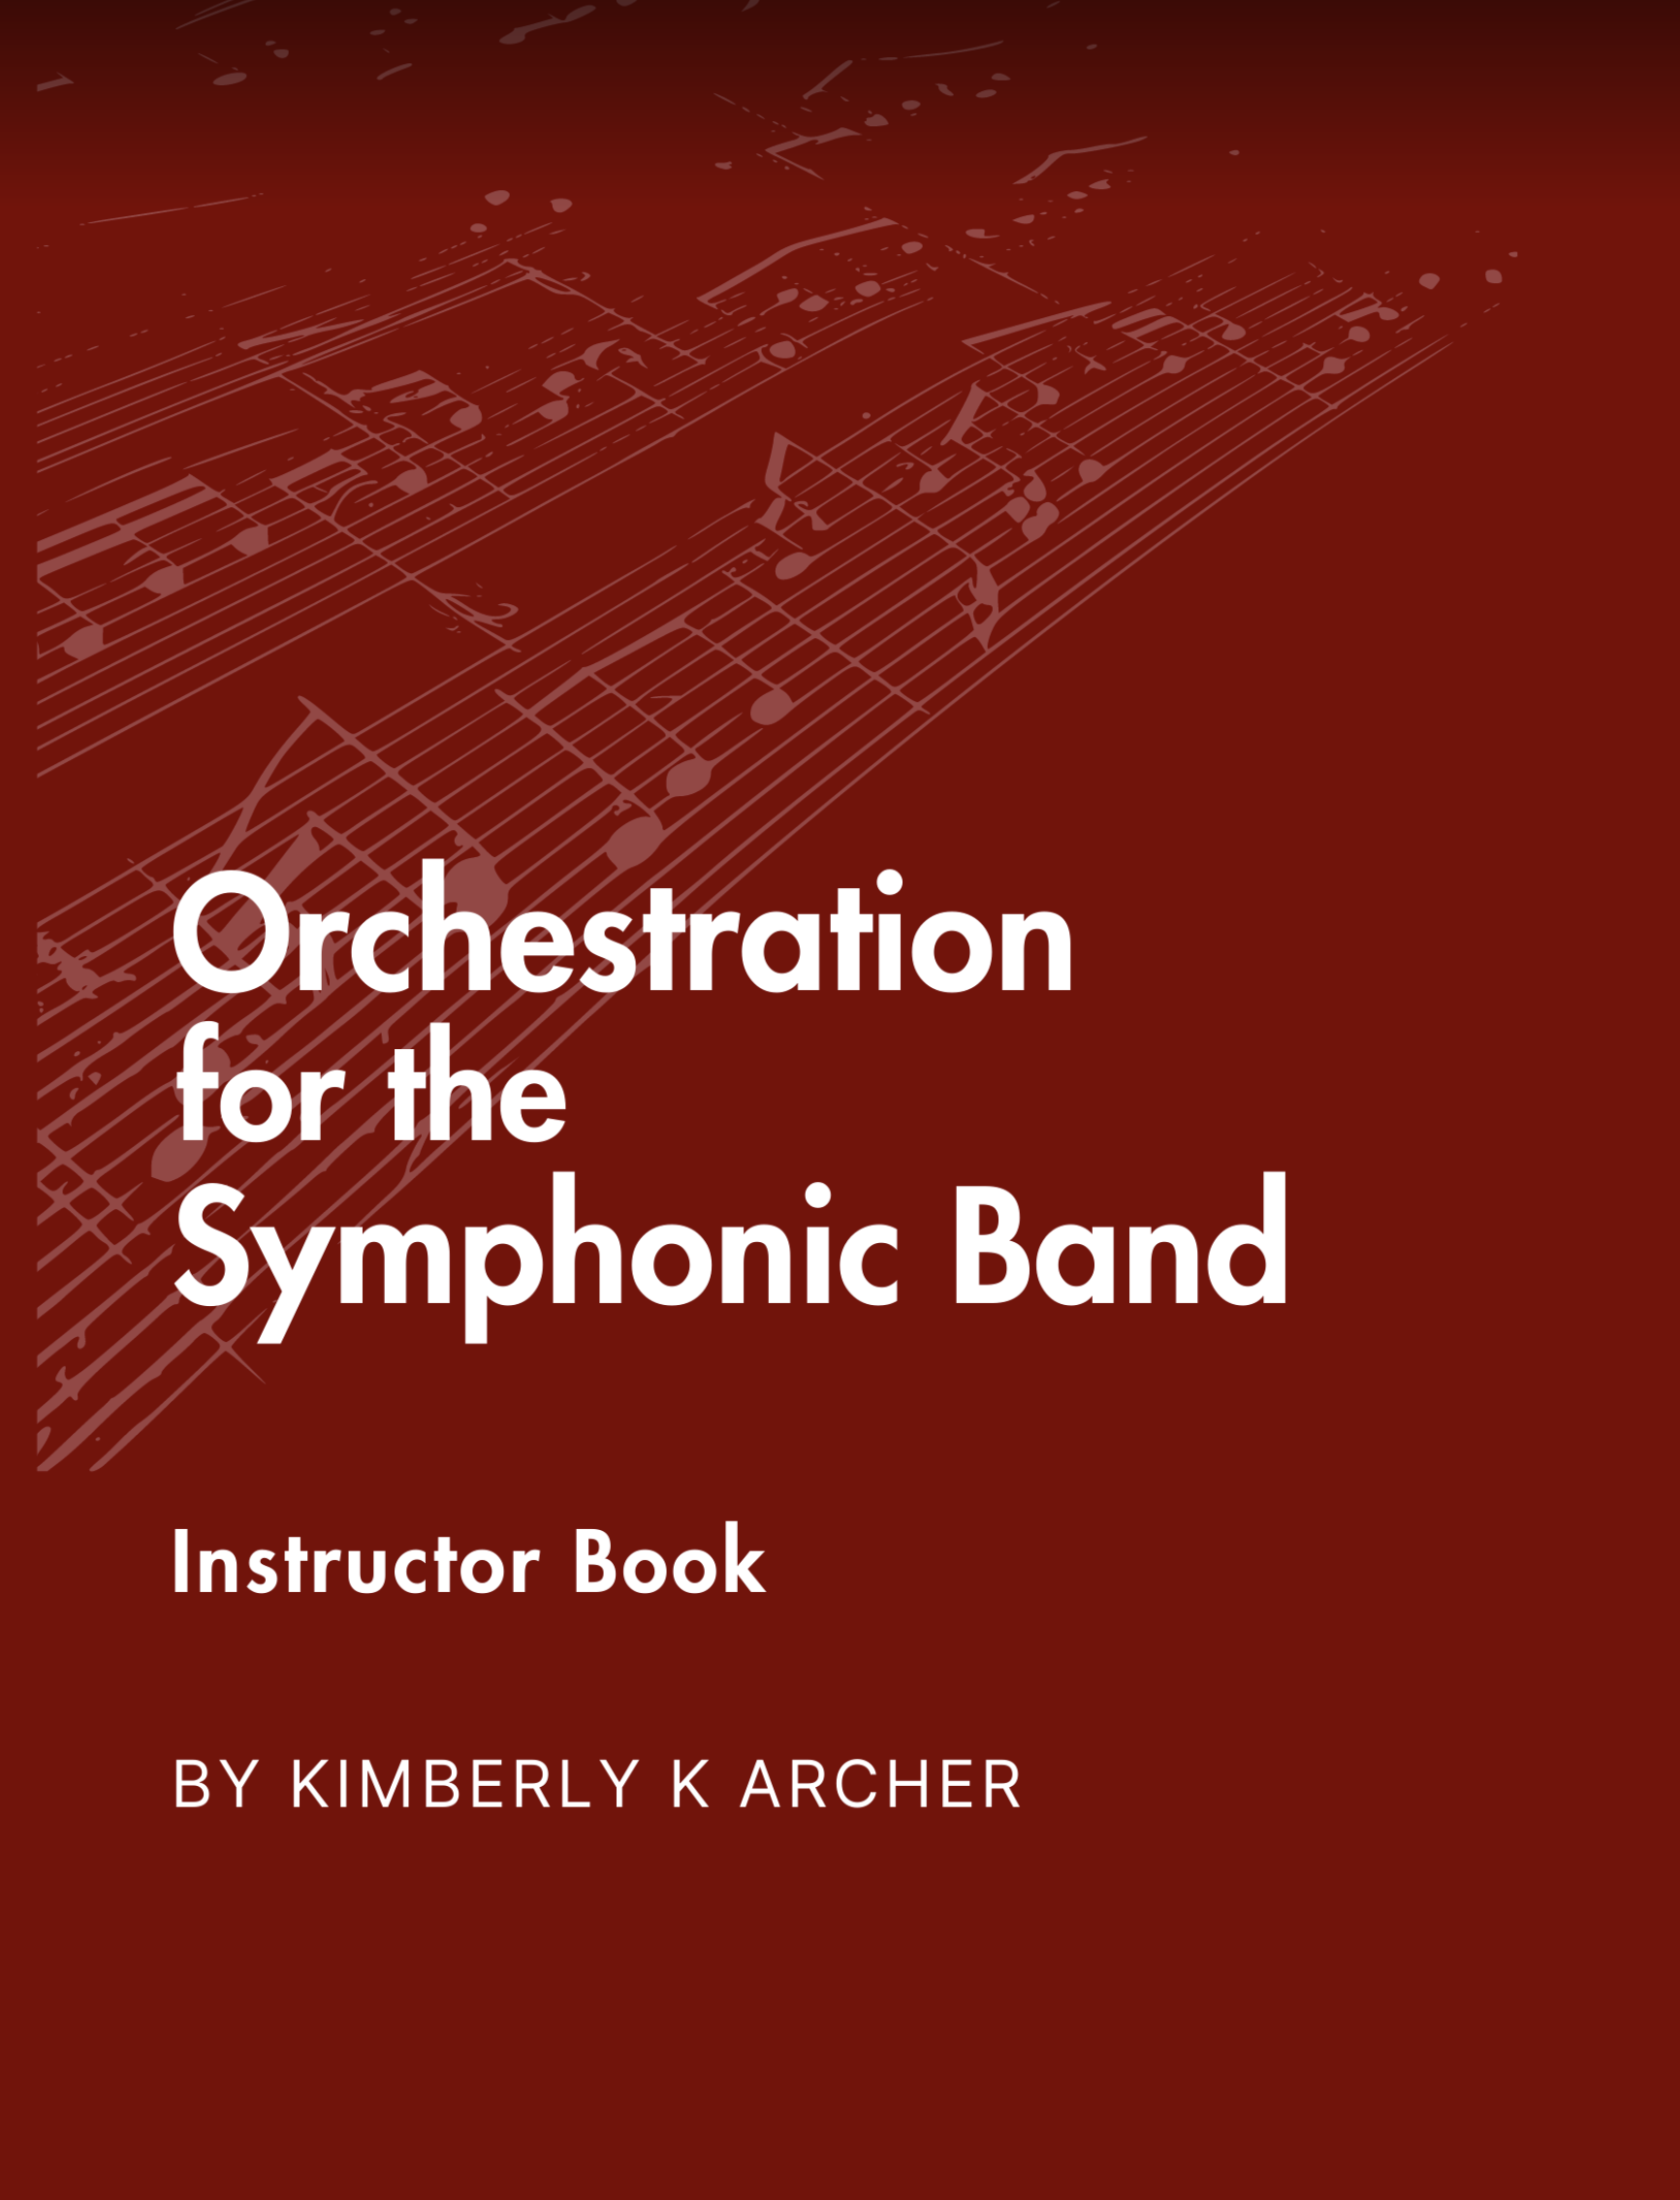 Orchestration For The Symphonic Band, Instructor Manual by Kimberly K. Archer